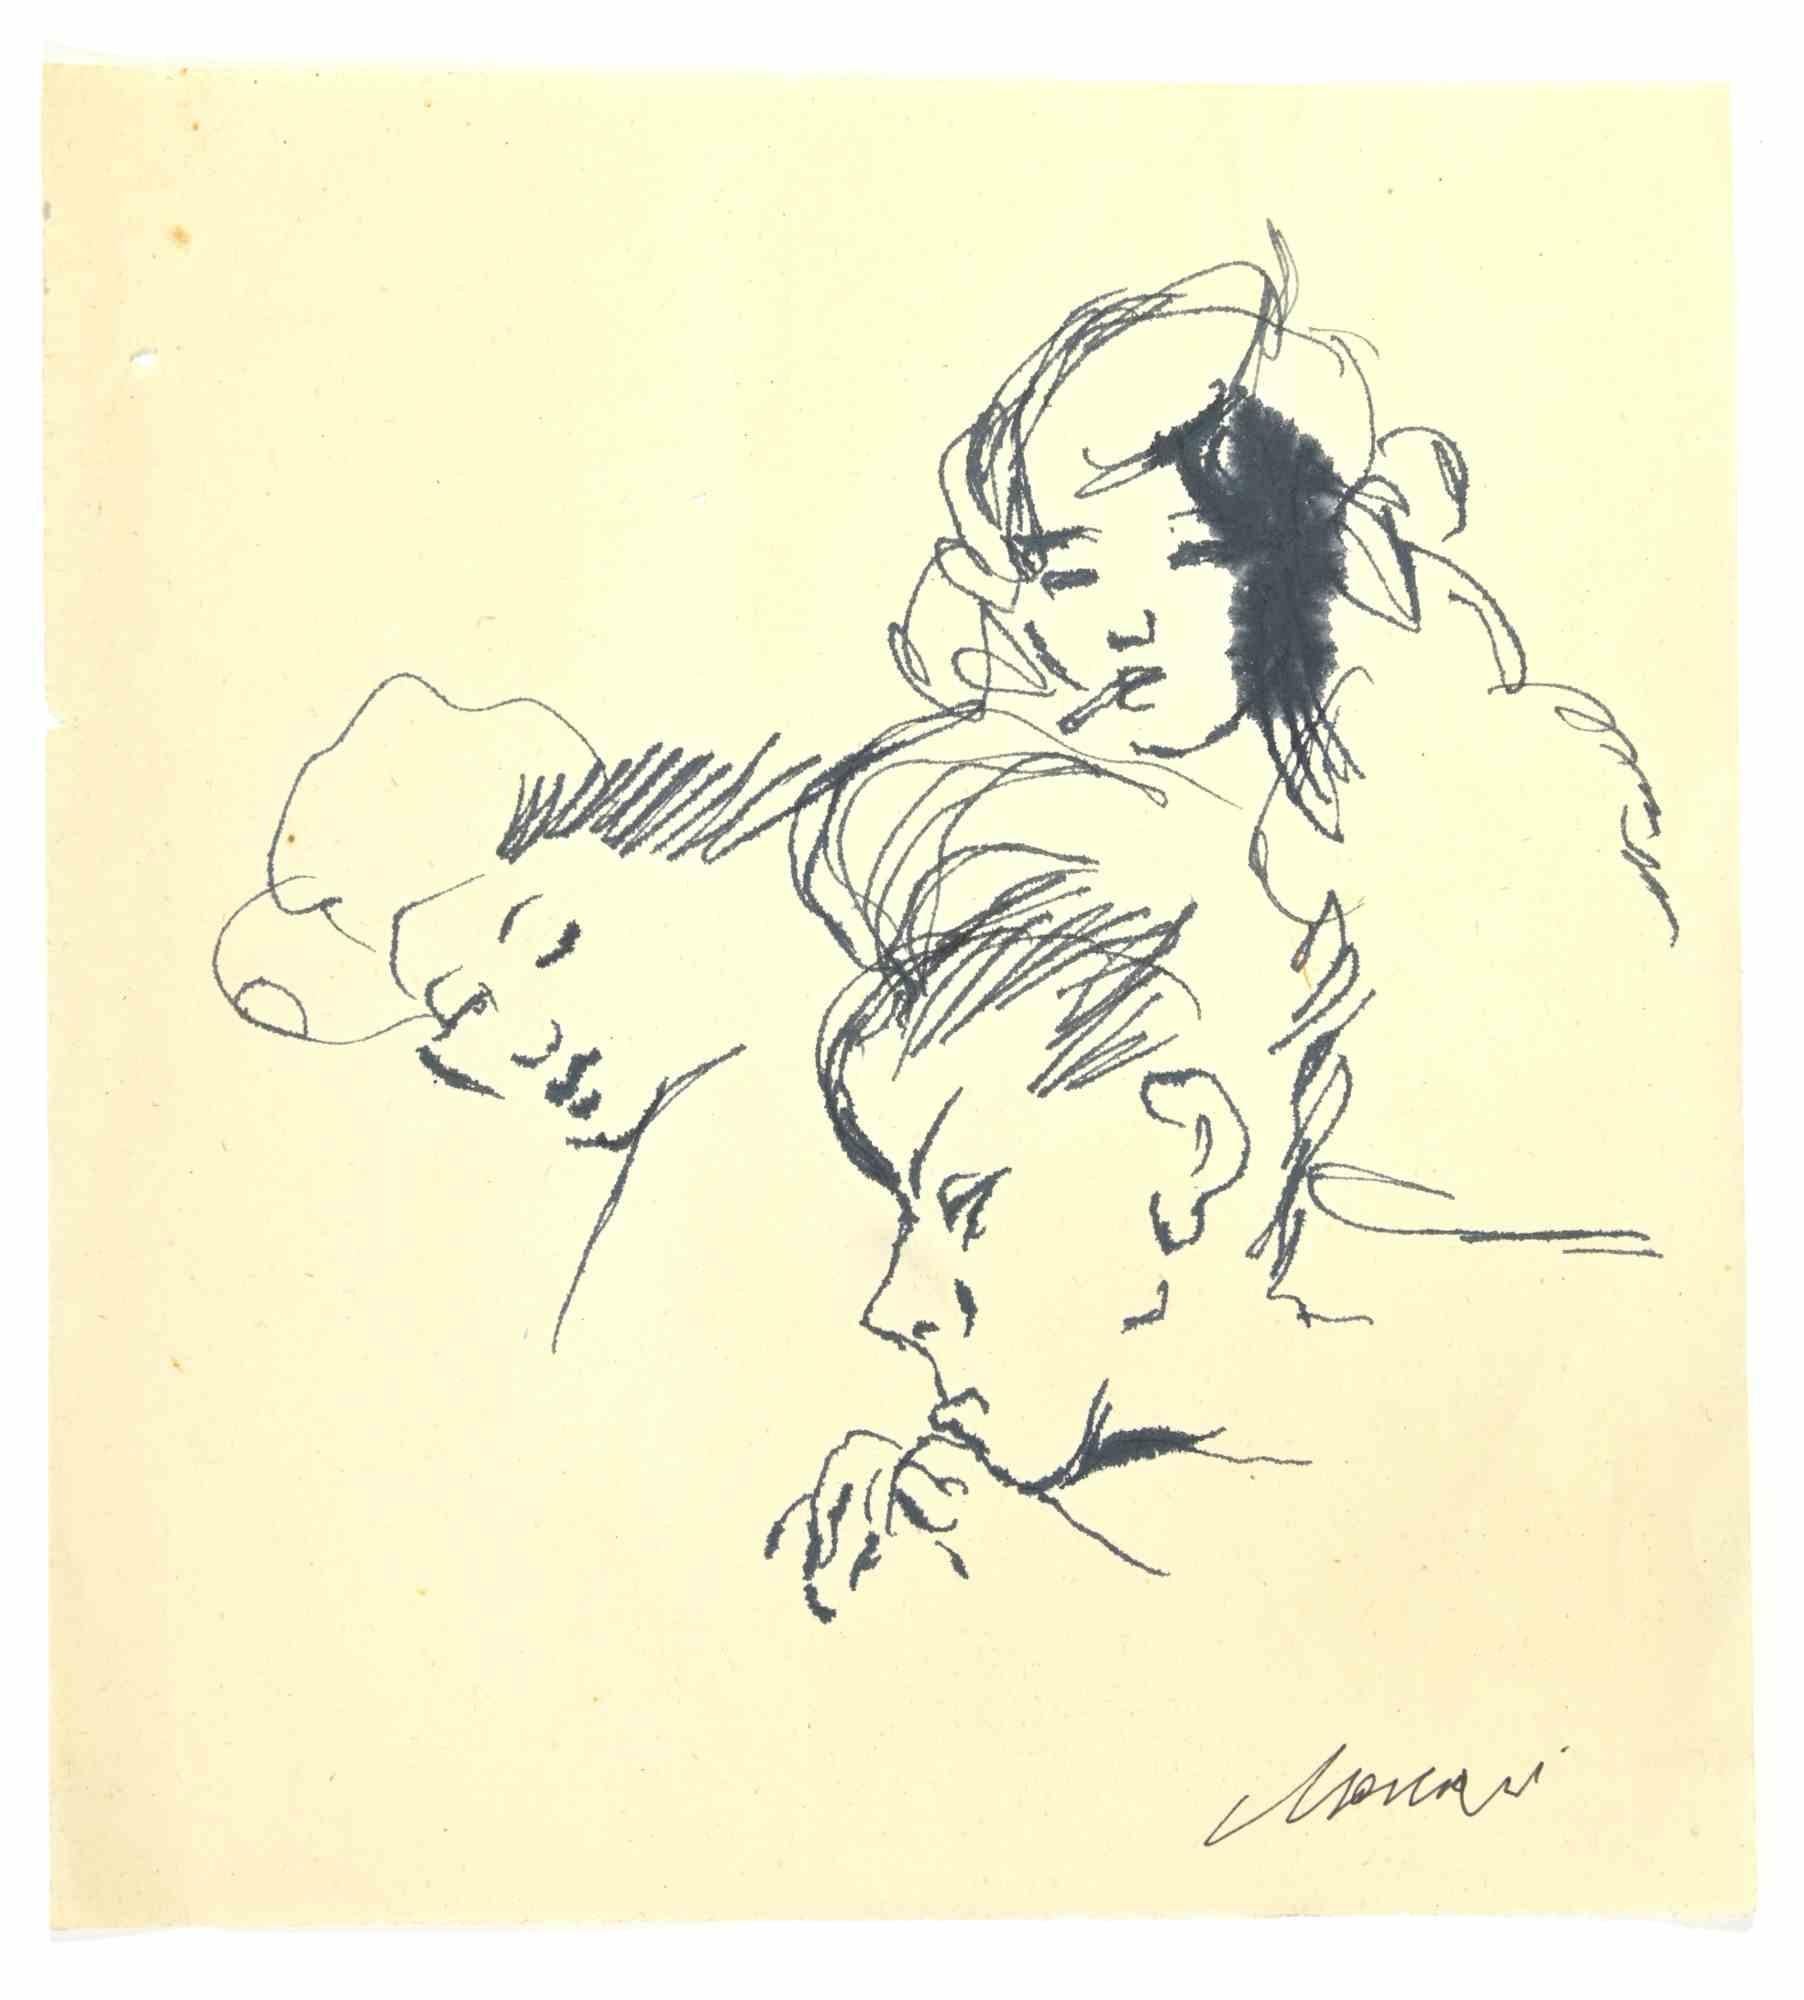 Portraits is a Pen Drawing realized by Mino Maccari  (1924-1989) in the 1950s.

Hand-signed on the lower.

Good conditions with small holes on the left and aged margins on the left.

Mino Maccari (Siena, 1924-Rome, June 16, 1989) was an Italian